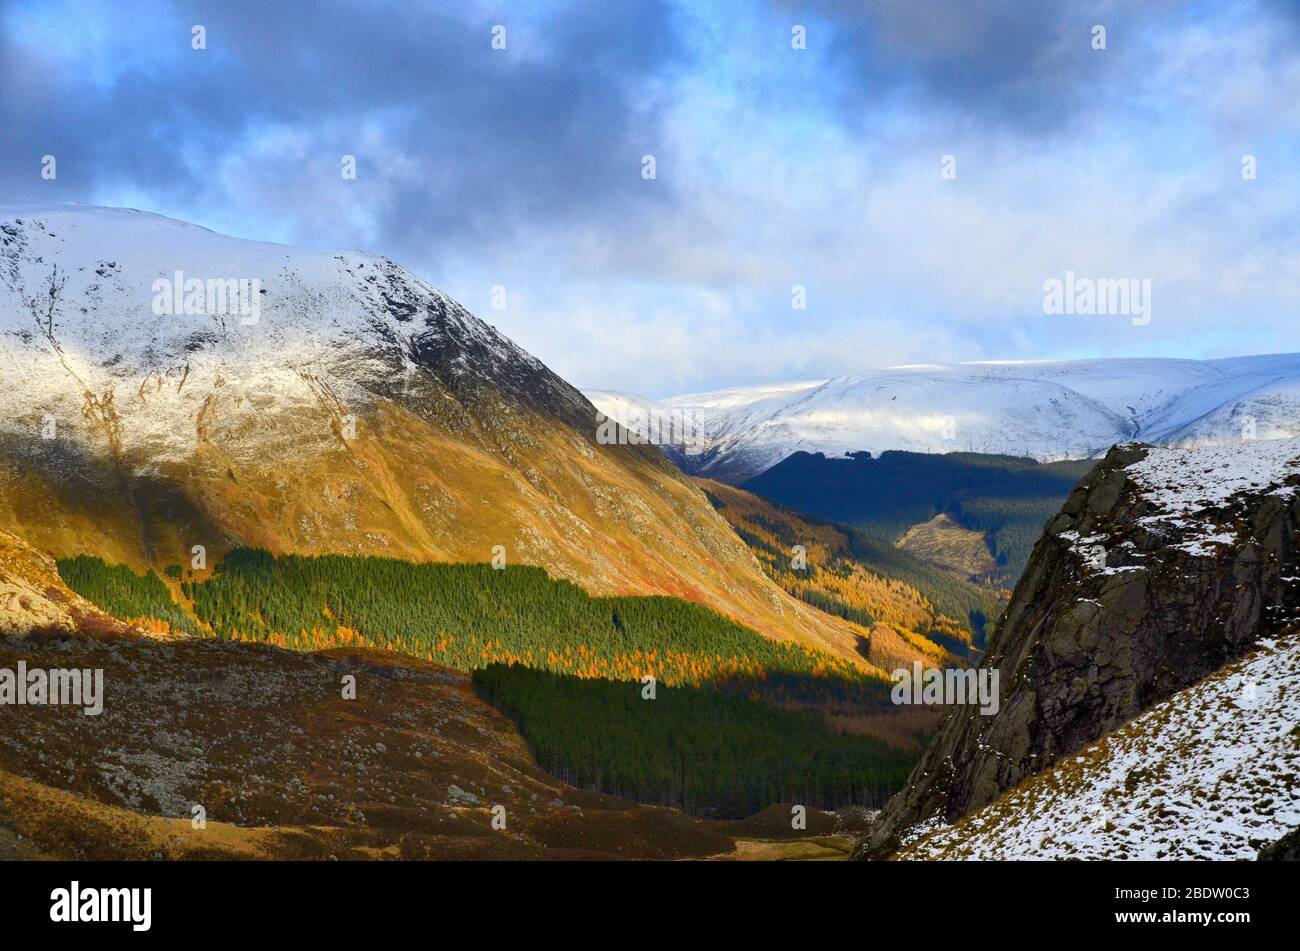 Glen Doll, within the Cairngorms National Park in Scotland, in early winter with a touch of snow on the hill tops. Stock Photo